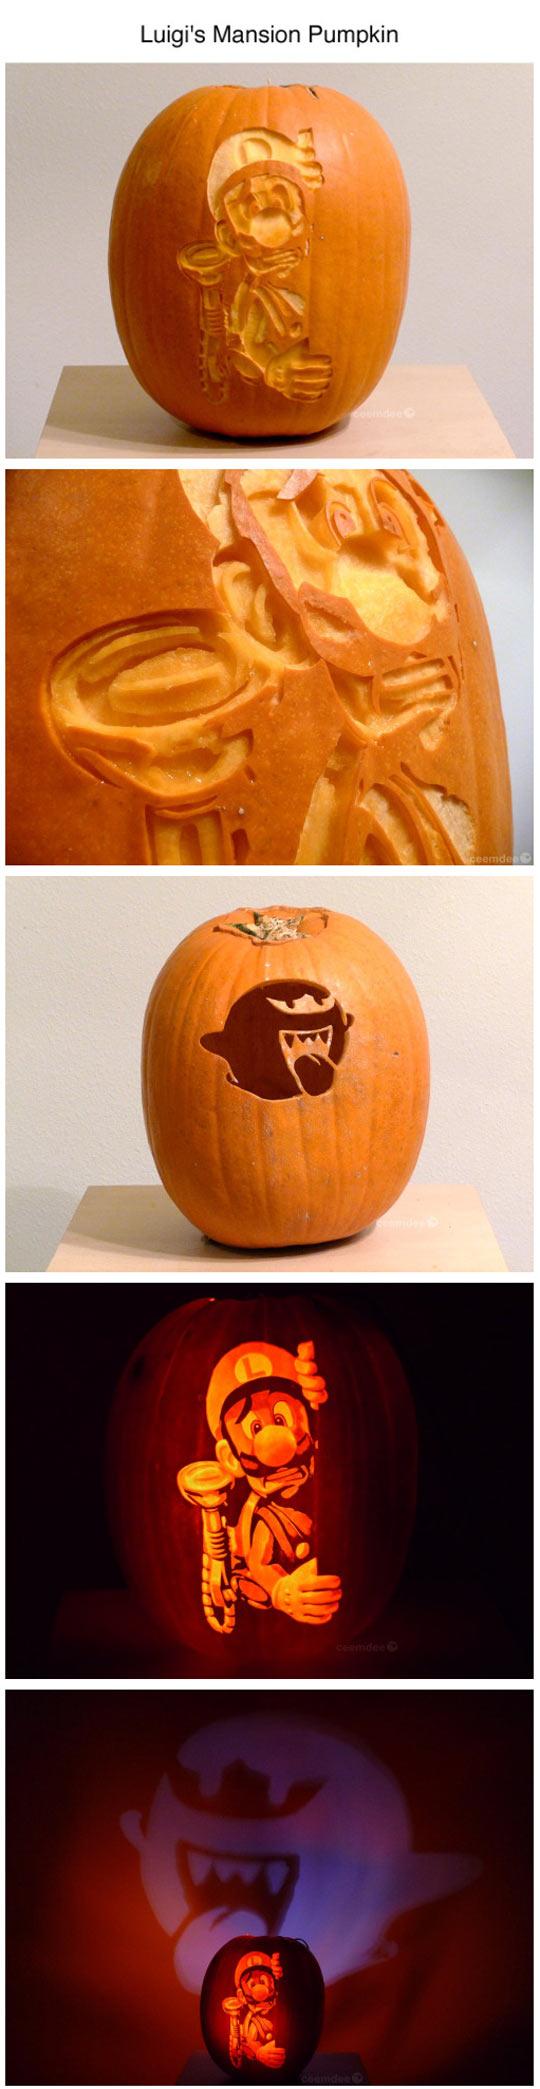 This Pumpkin Is Brilliant, Check Out The Last Picture